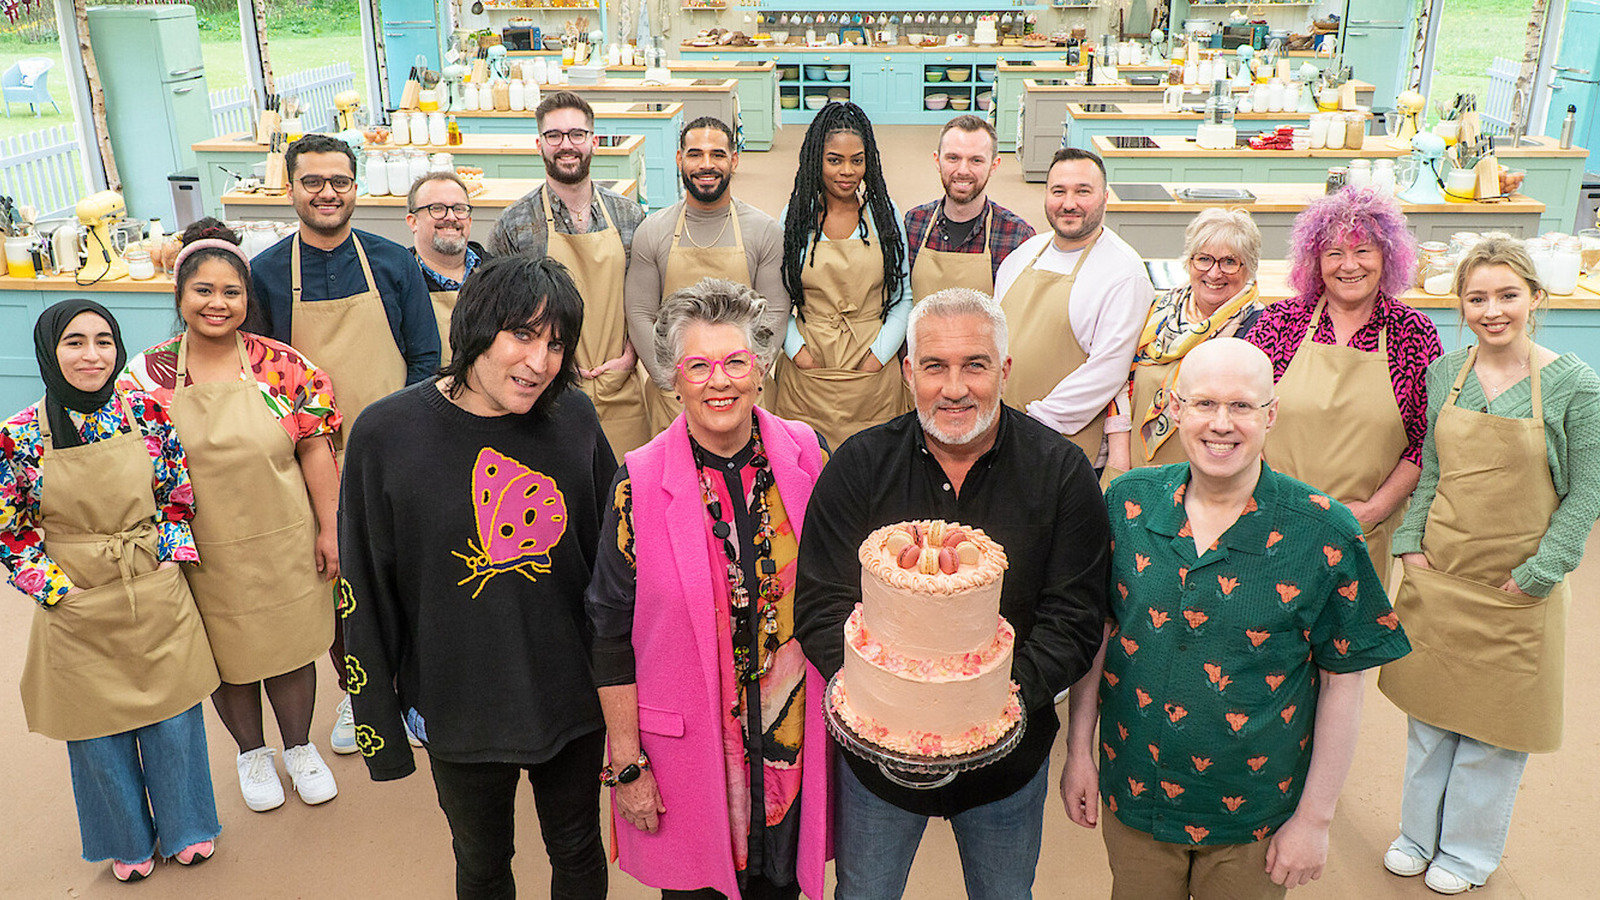 The Great British Bake Off Mexican Week Controversy, Explained